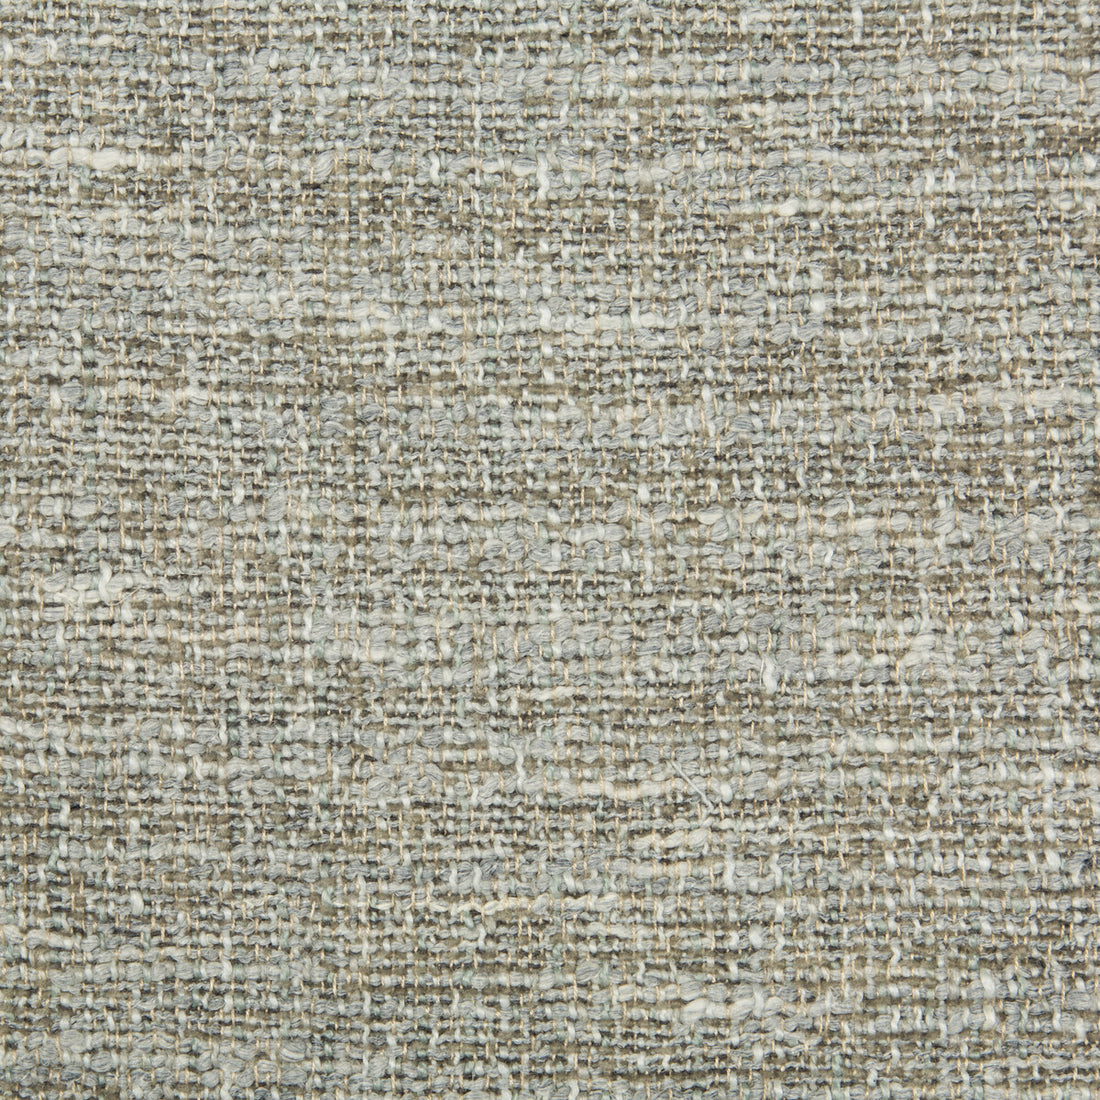 Kravet Couture fabric in 34252-11 color - pattern 34252.11.0 - by Kravet Couture